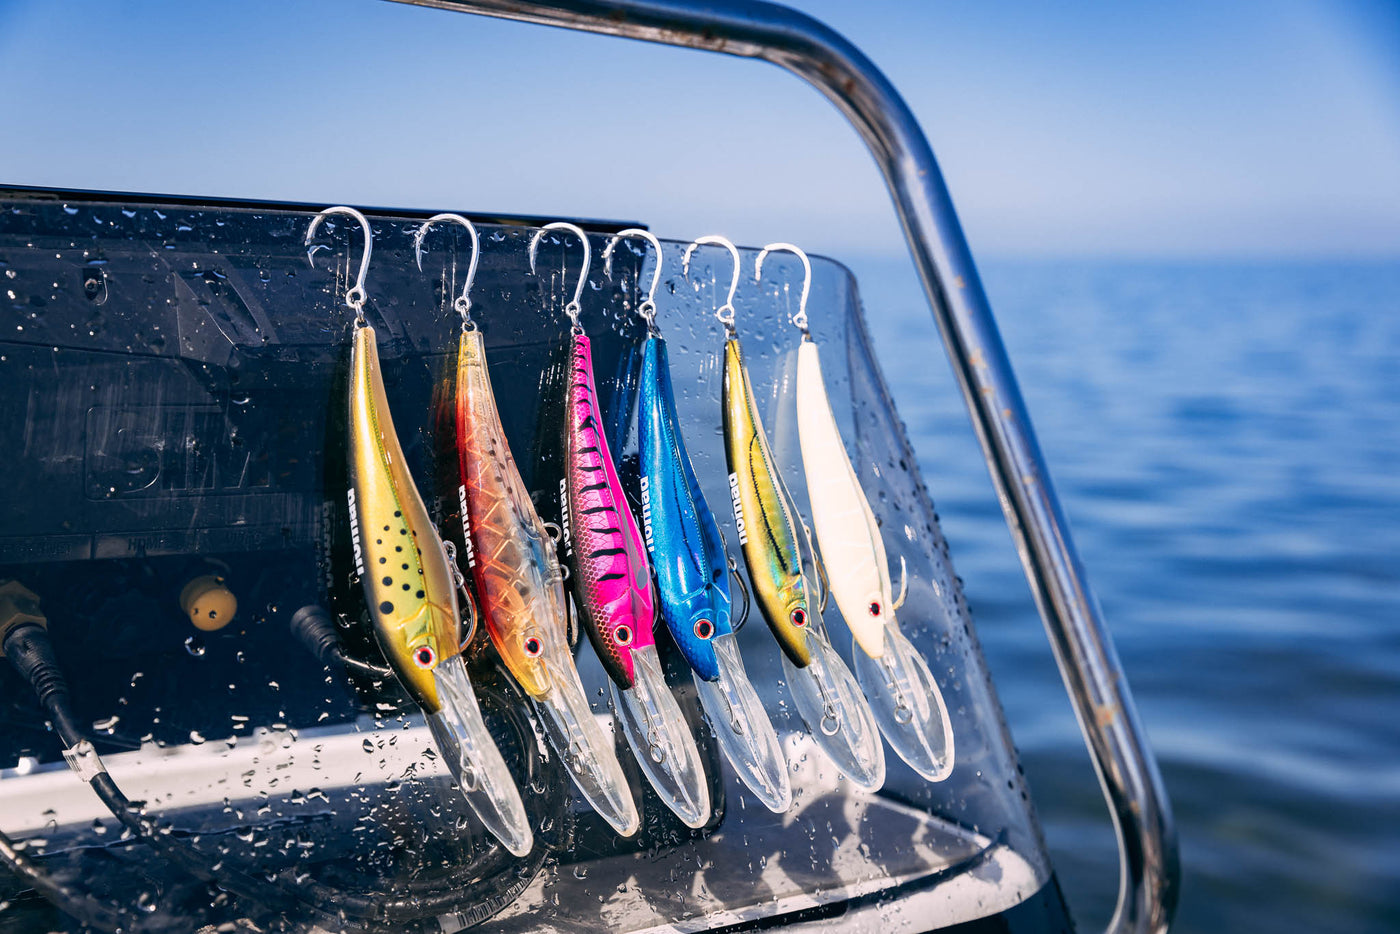 DTX Minnow 110 & 125 - Small but mighty